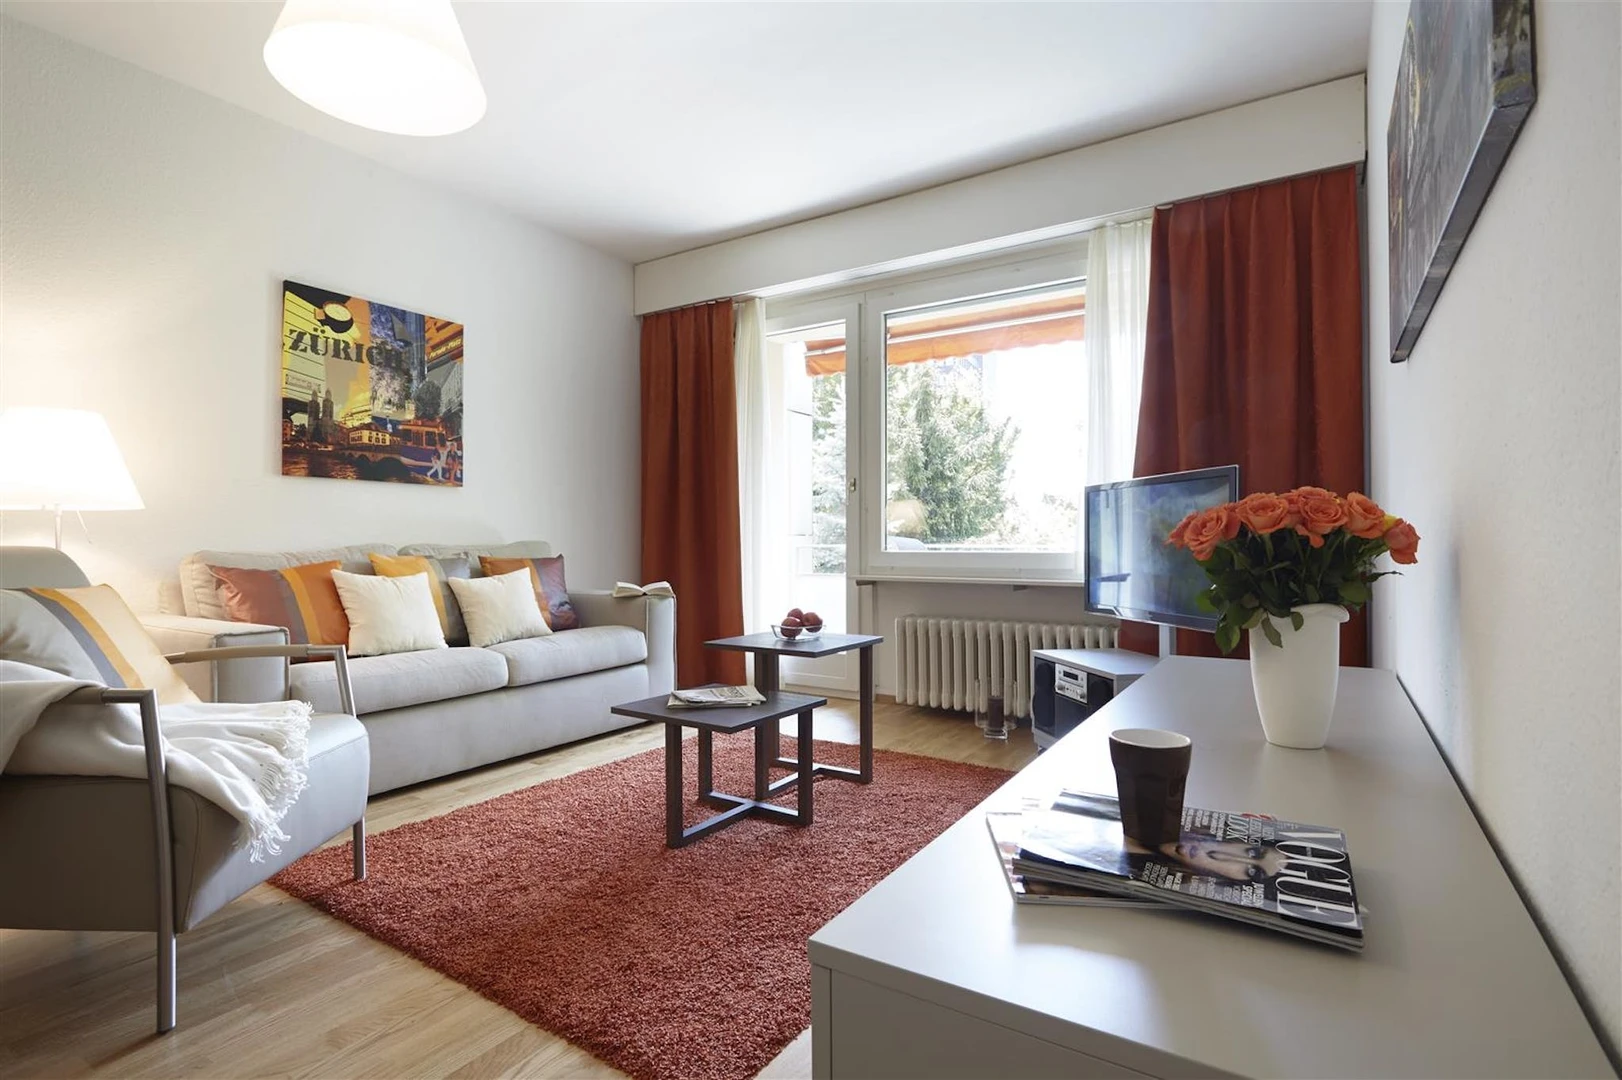 Accommodation in the centre of zurich